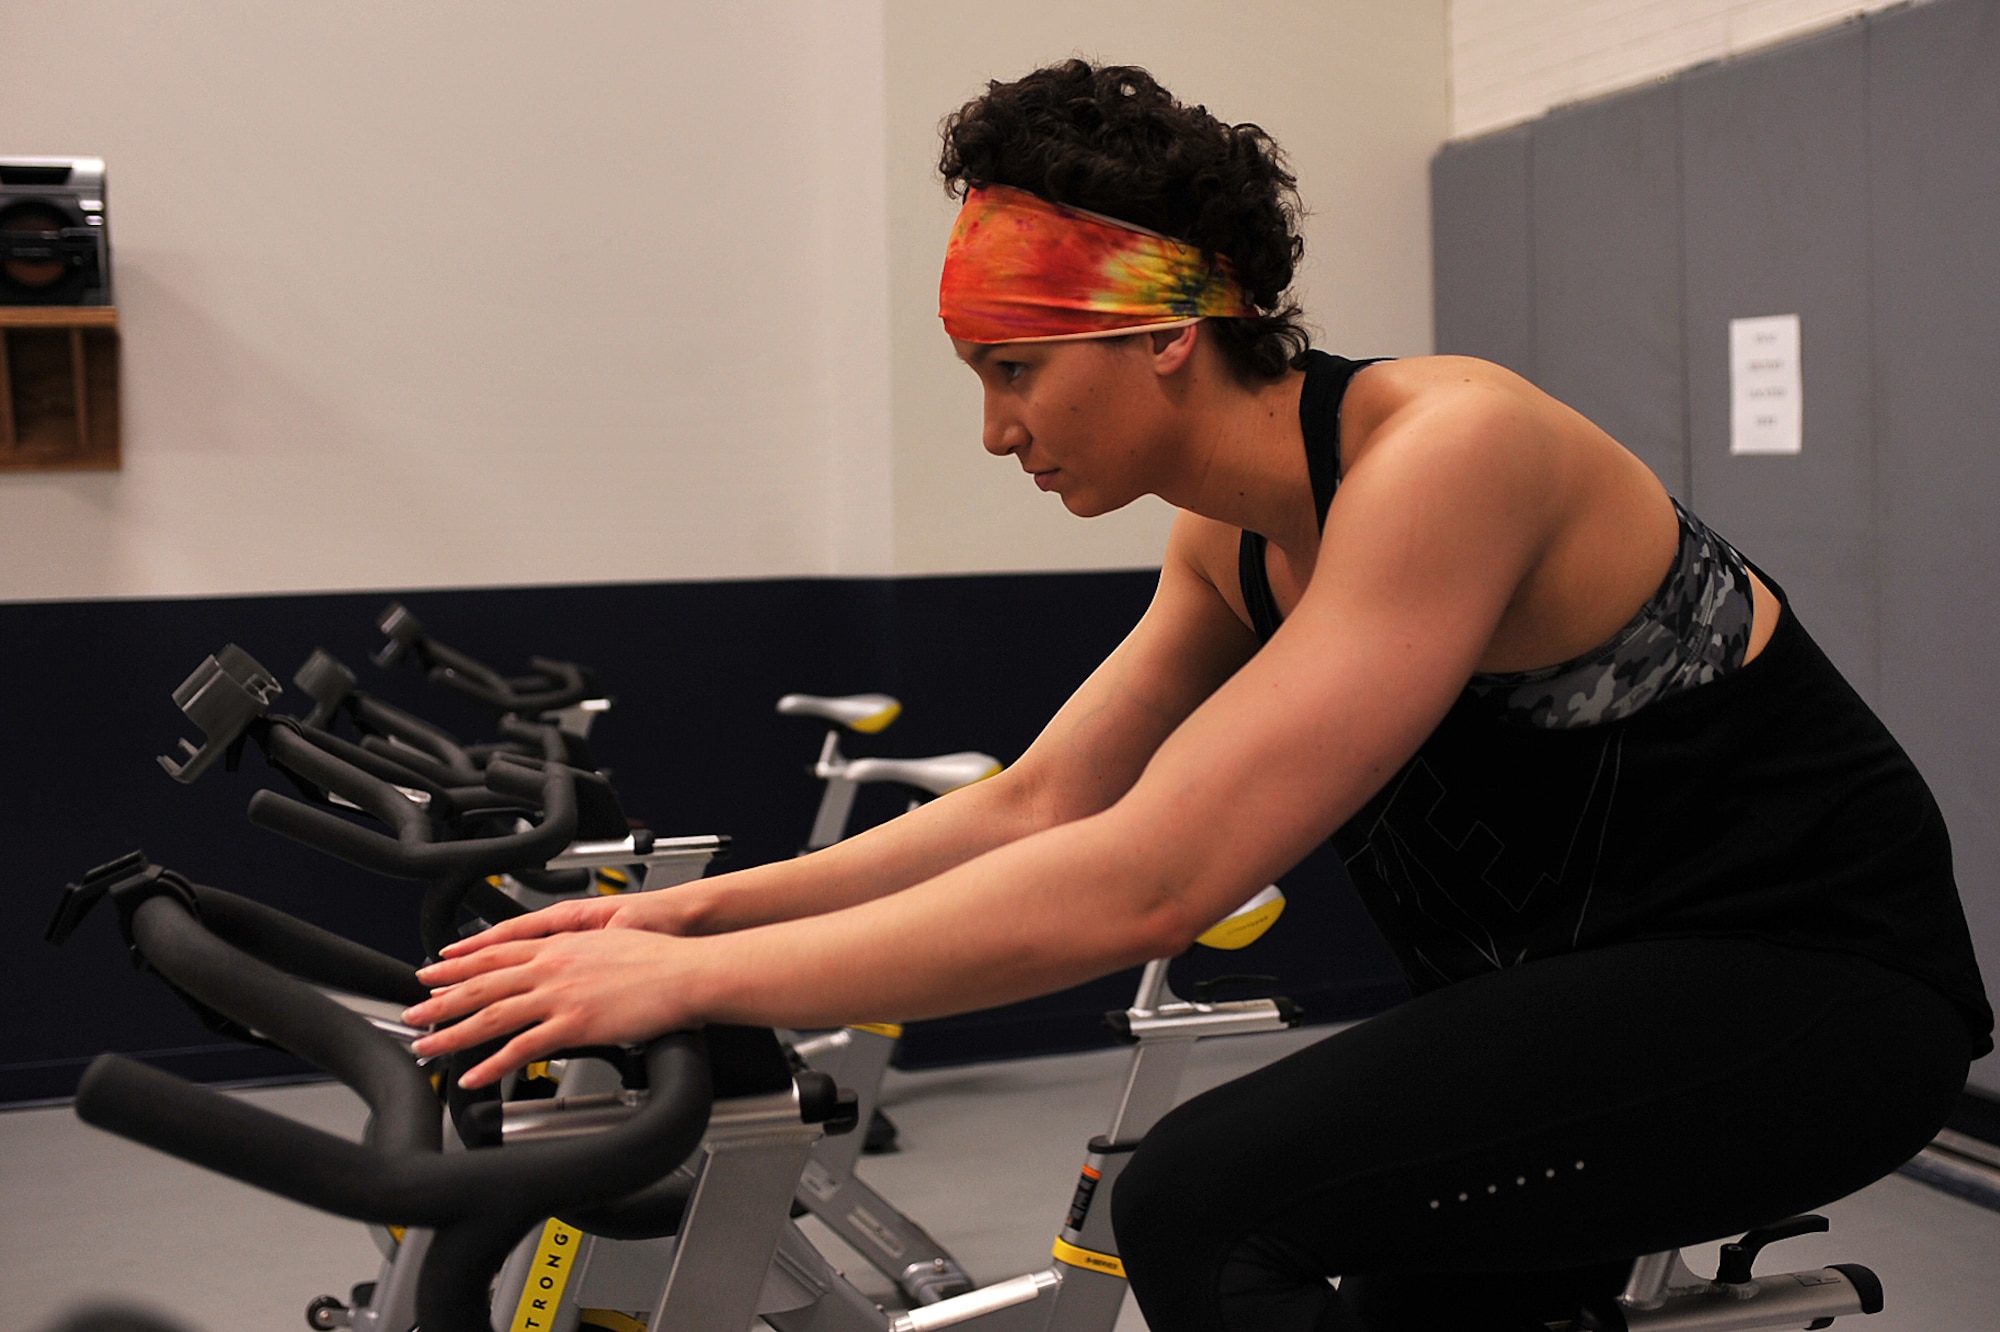 Senior Airman Myiah Castillejo, 348th Reconnaissance Squadron, maintains the health of her heart and lungs after radiation treatment by indoor cycling on Grand Forks Air Force Base, N.D., March 29, 2015. The radiation was used in conjunction with chemotherapy to treat the Hodgkin’s lymphoma that she was diagnosed with in January 2014. Castillejo was declared cancer free on Jan. 15, 2015. (U.S. Air Force photo/Airman 1st Class Bonnie Grantham/Released)